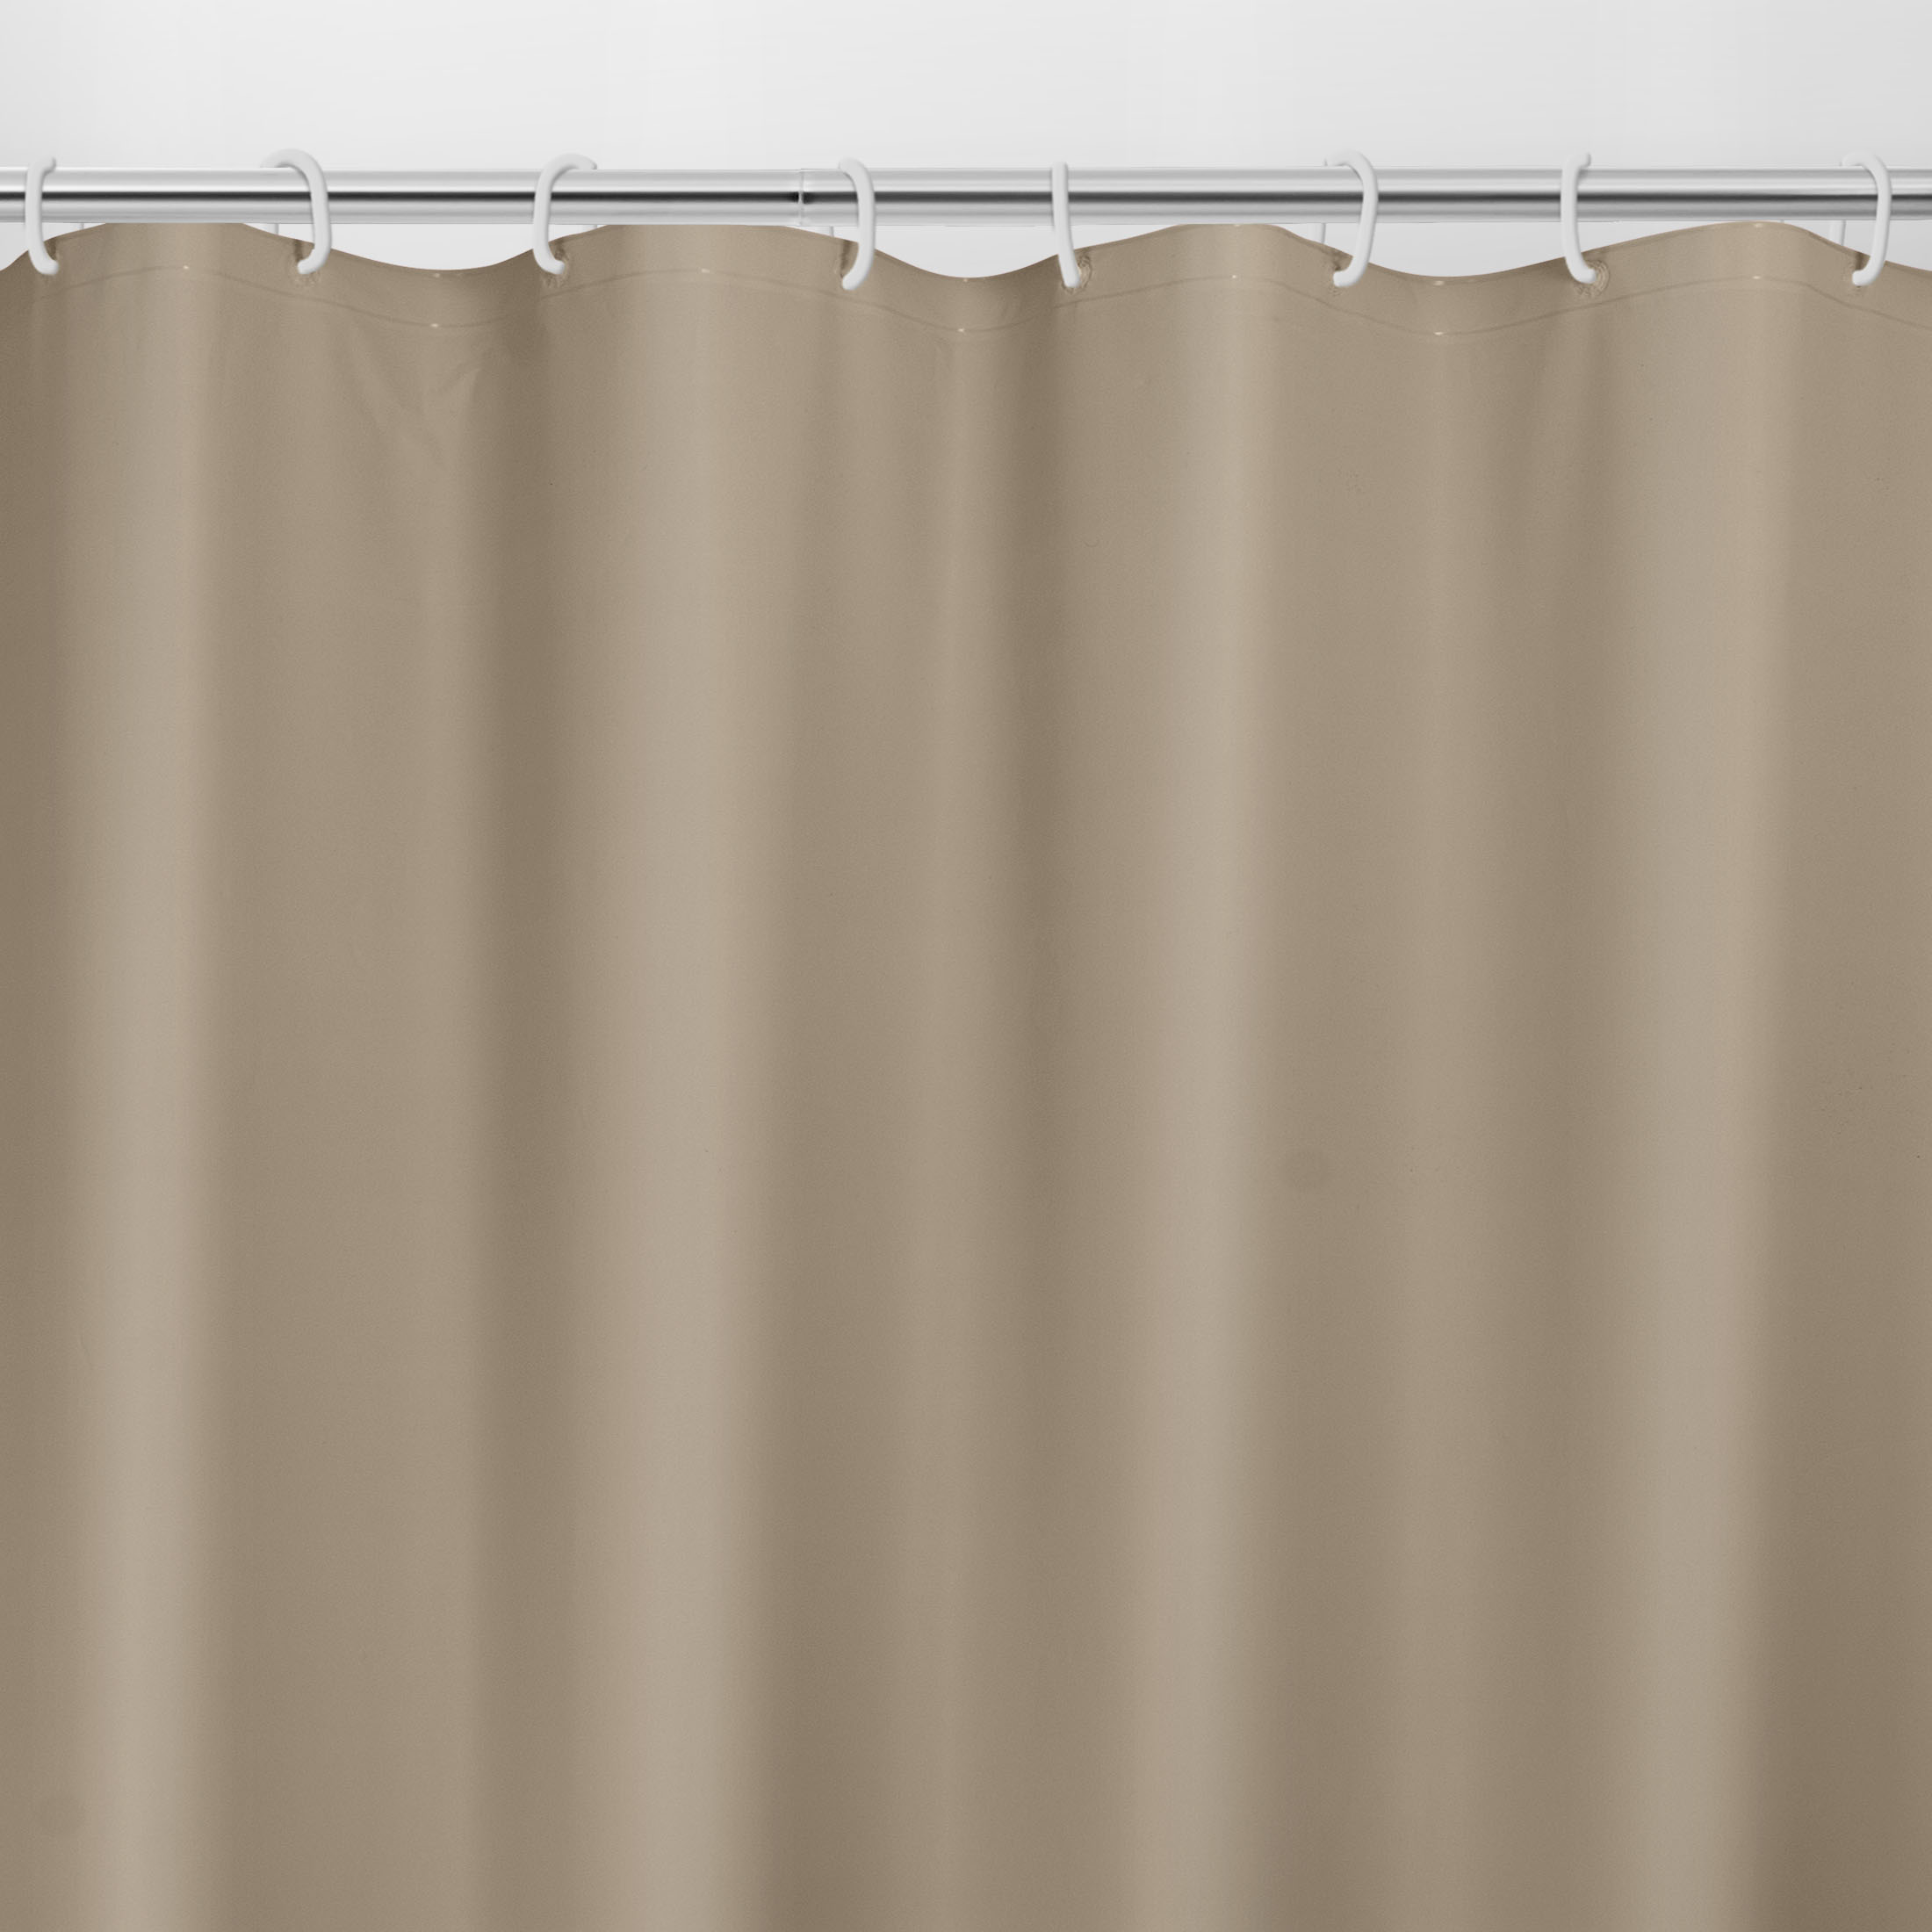 Light Weight PEVA Shower Curtain Liner, Weighted Magnetic Hem, Brown, 70" x 71", Mainstays - image 4 of 7